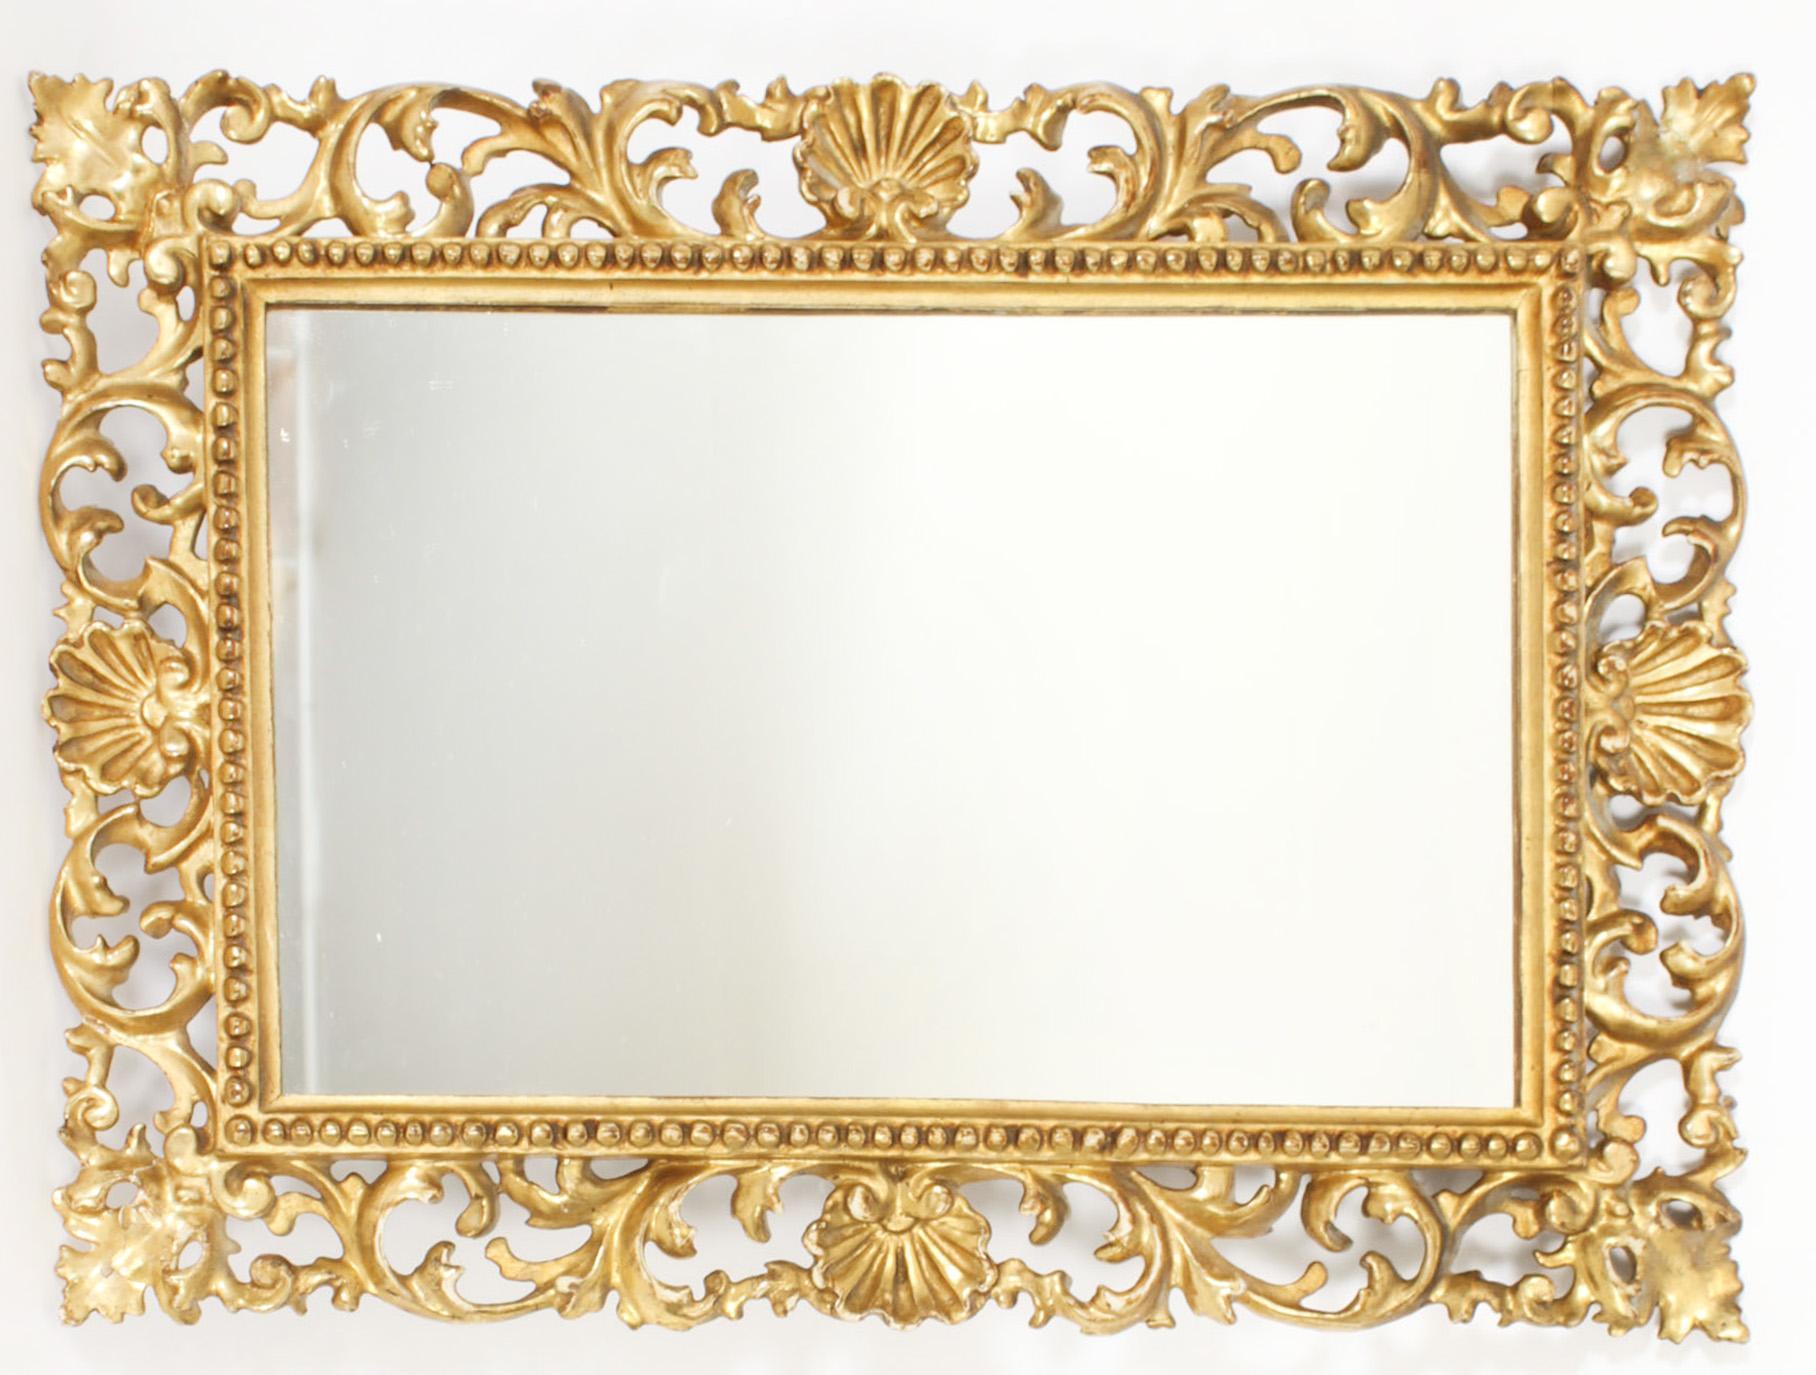 A superbly carved and highly decorative small fine quality Italian Florentine giltwood  mirror, mid 19th Century in date. 

This rectangular mirror consists of a superbly carved giltwood frame with a beaded border with scrolling acanthus foliate and